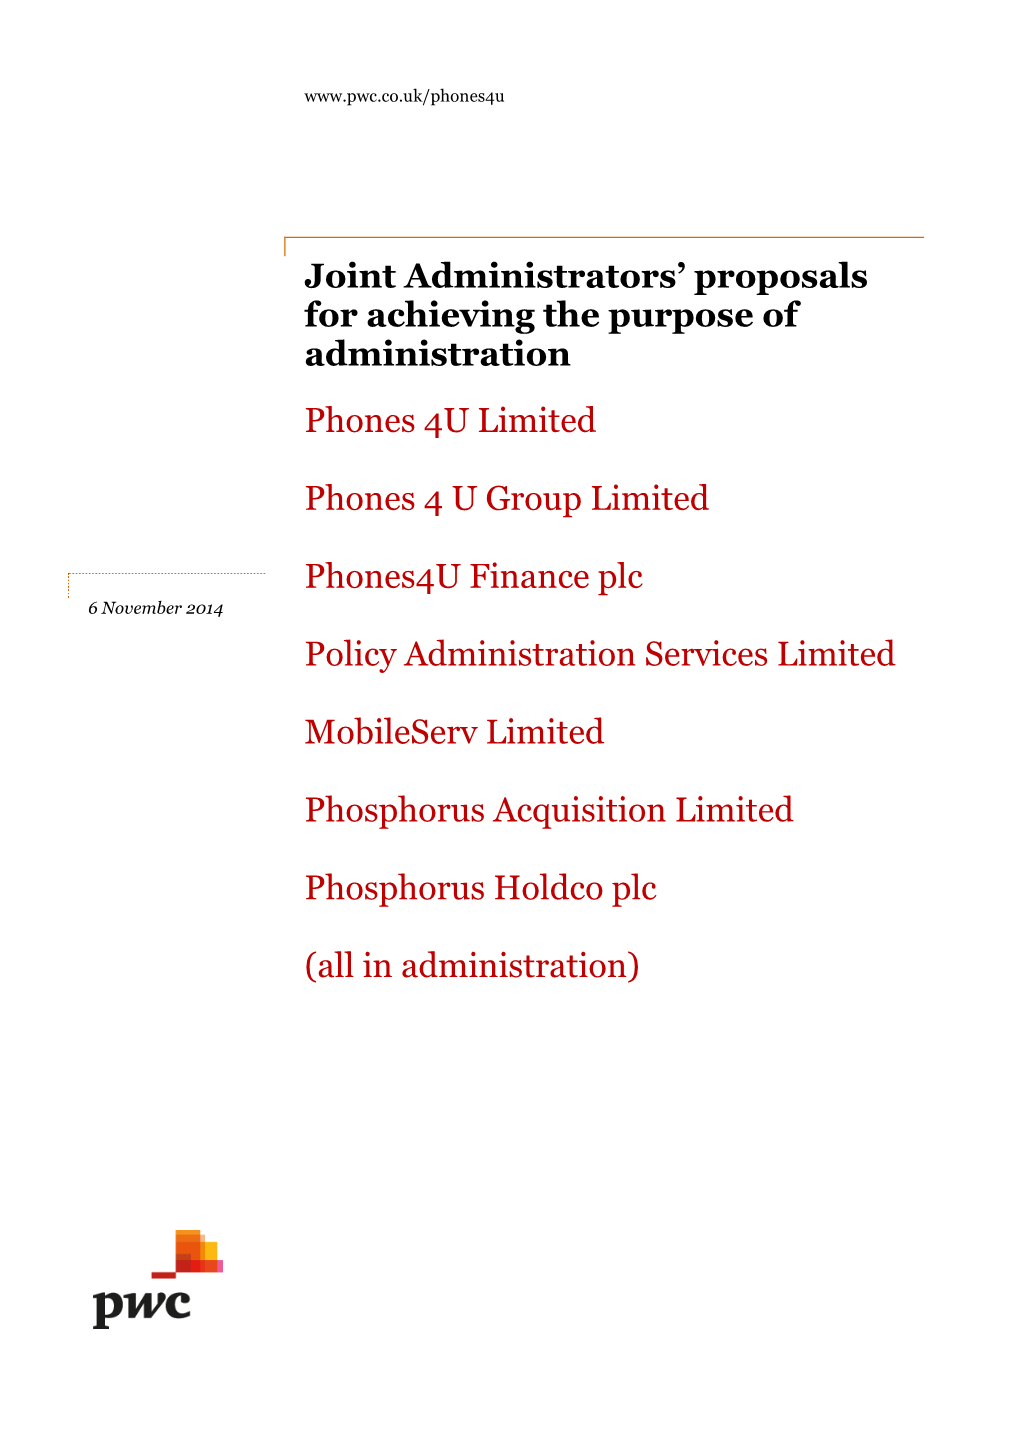 Joint Administrators' Proposals for Achieving the Purpose Of